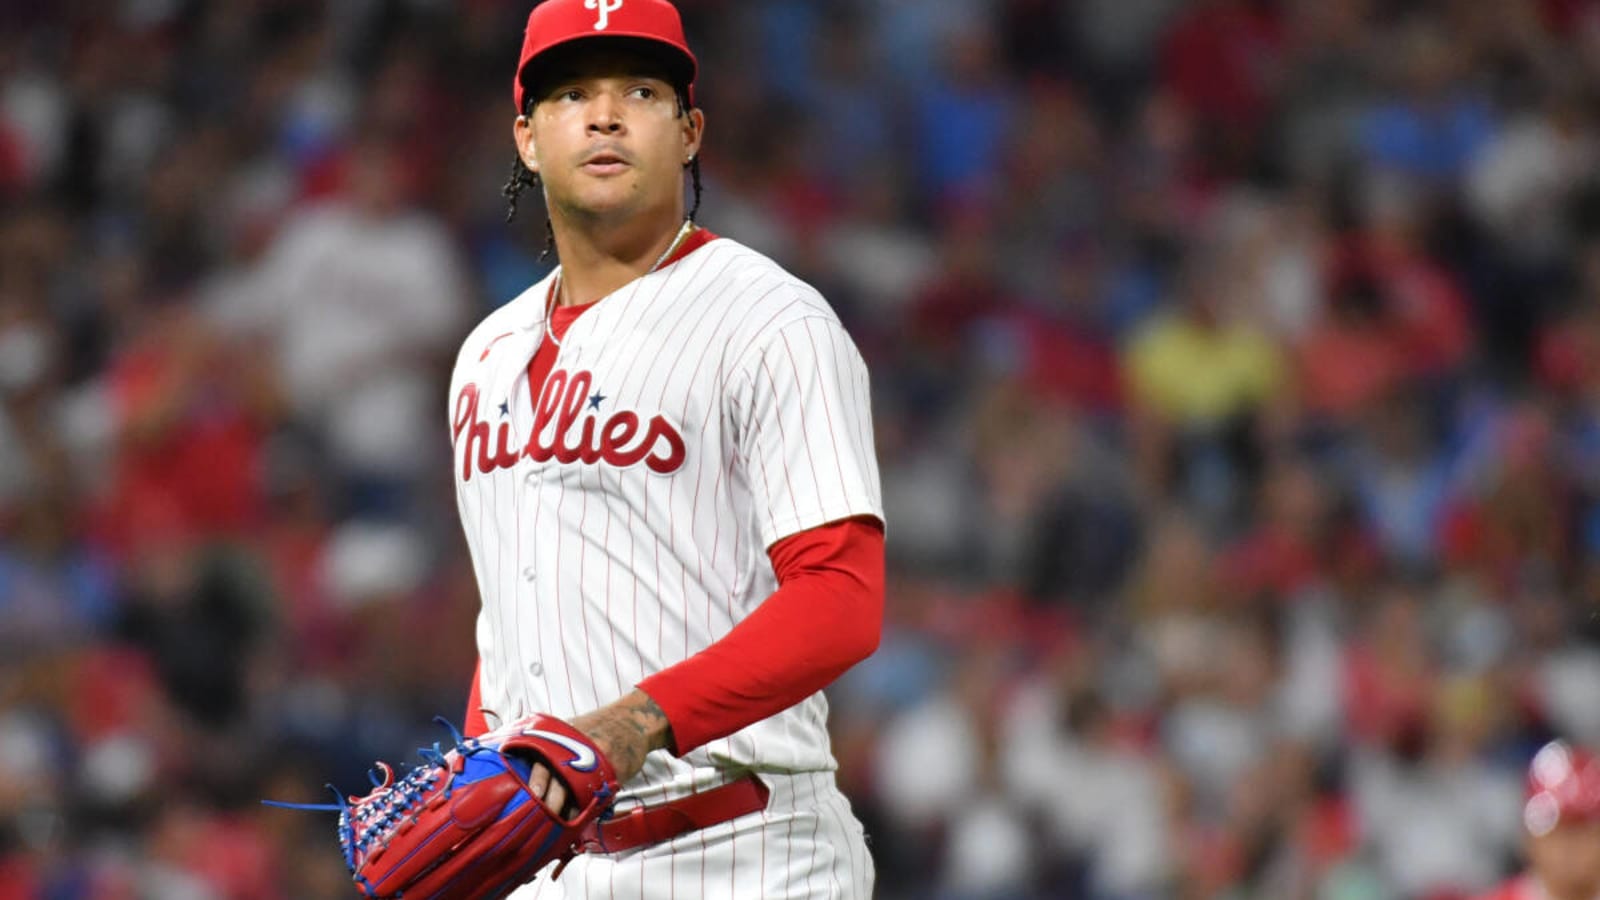 Walker Expresses Disdain for Phillies After Not Pitching in Postseason